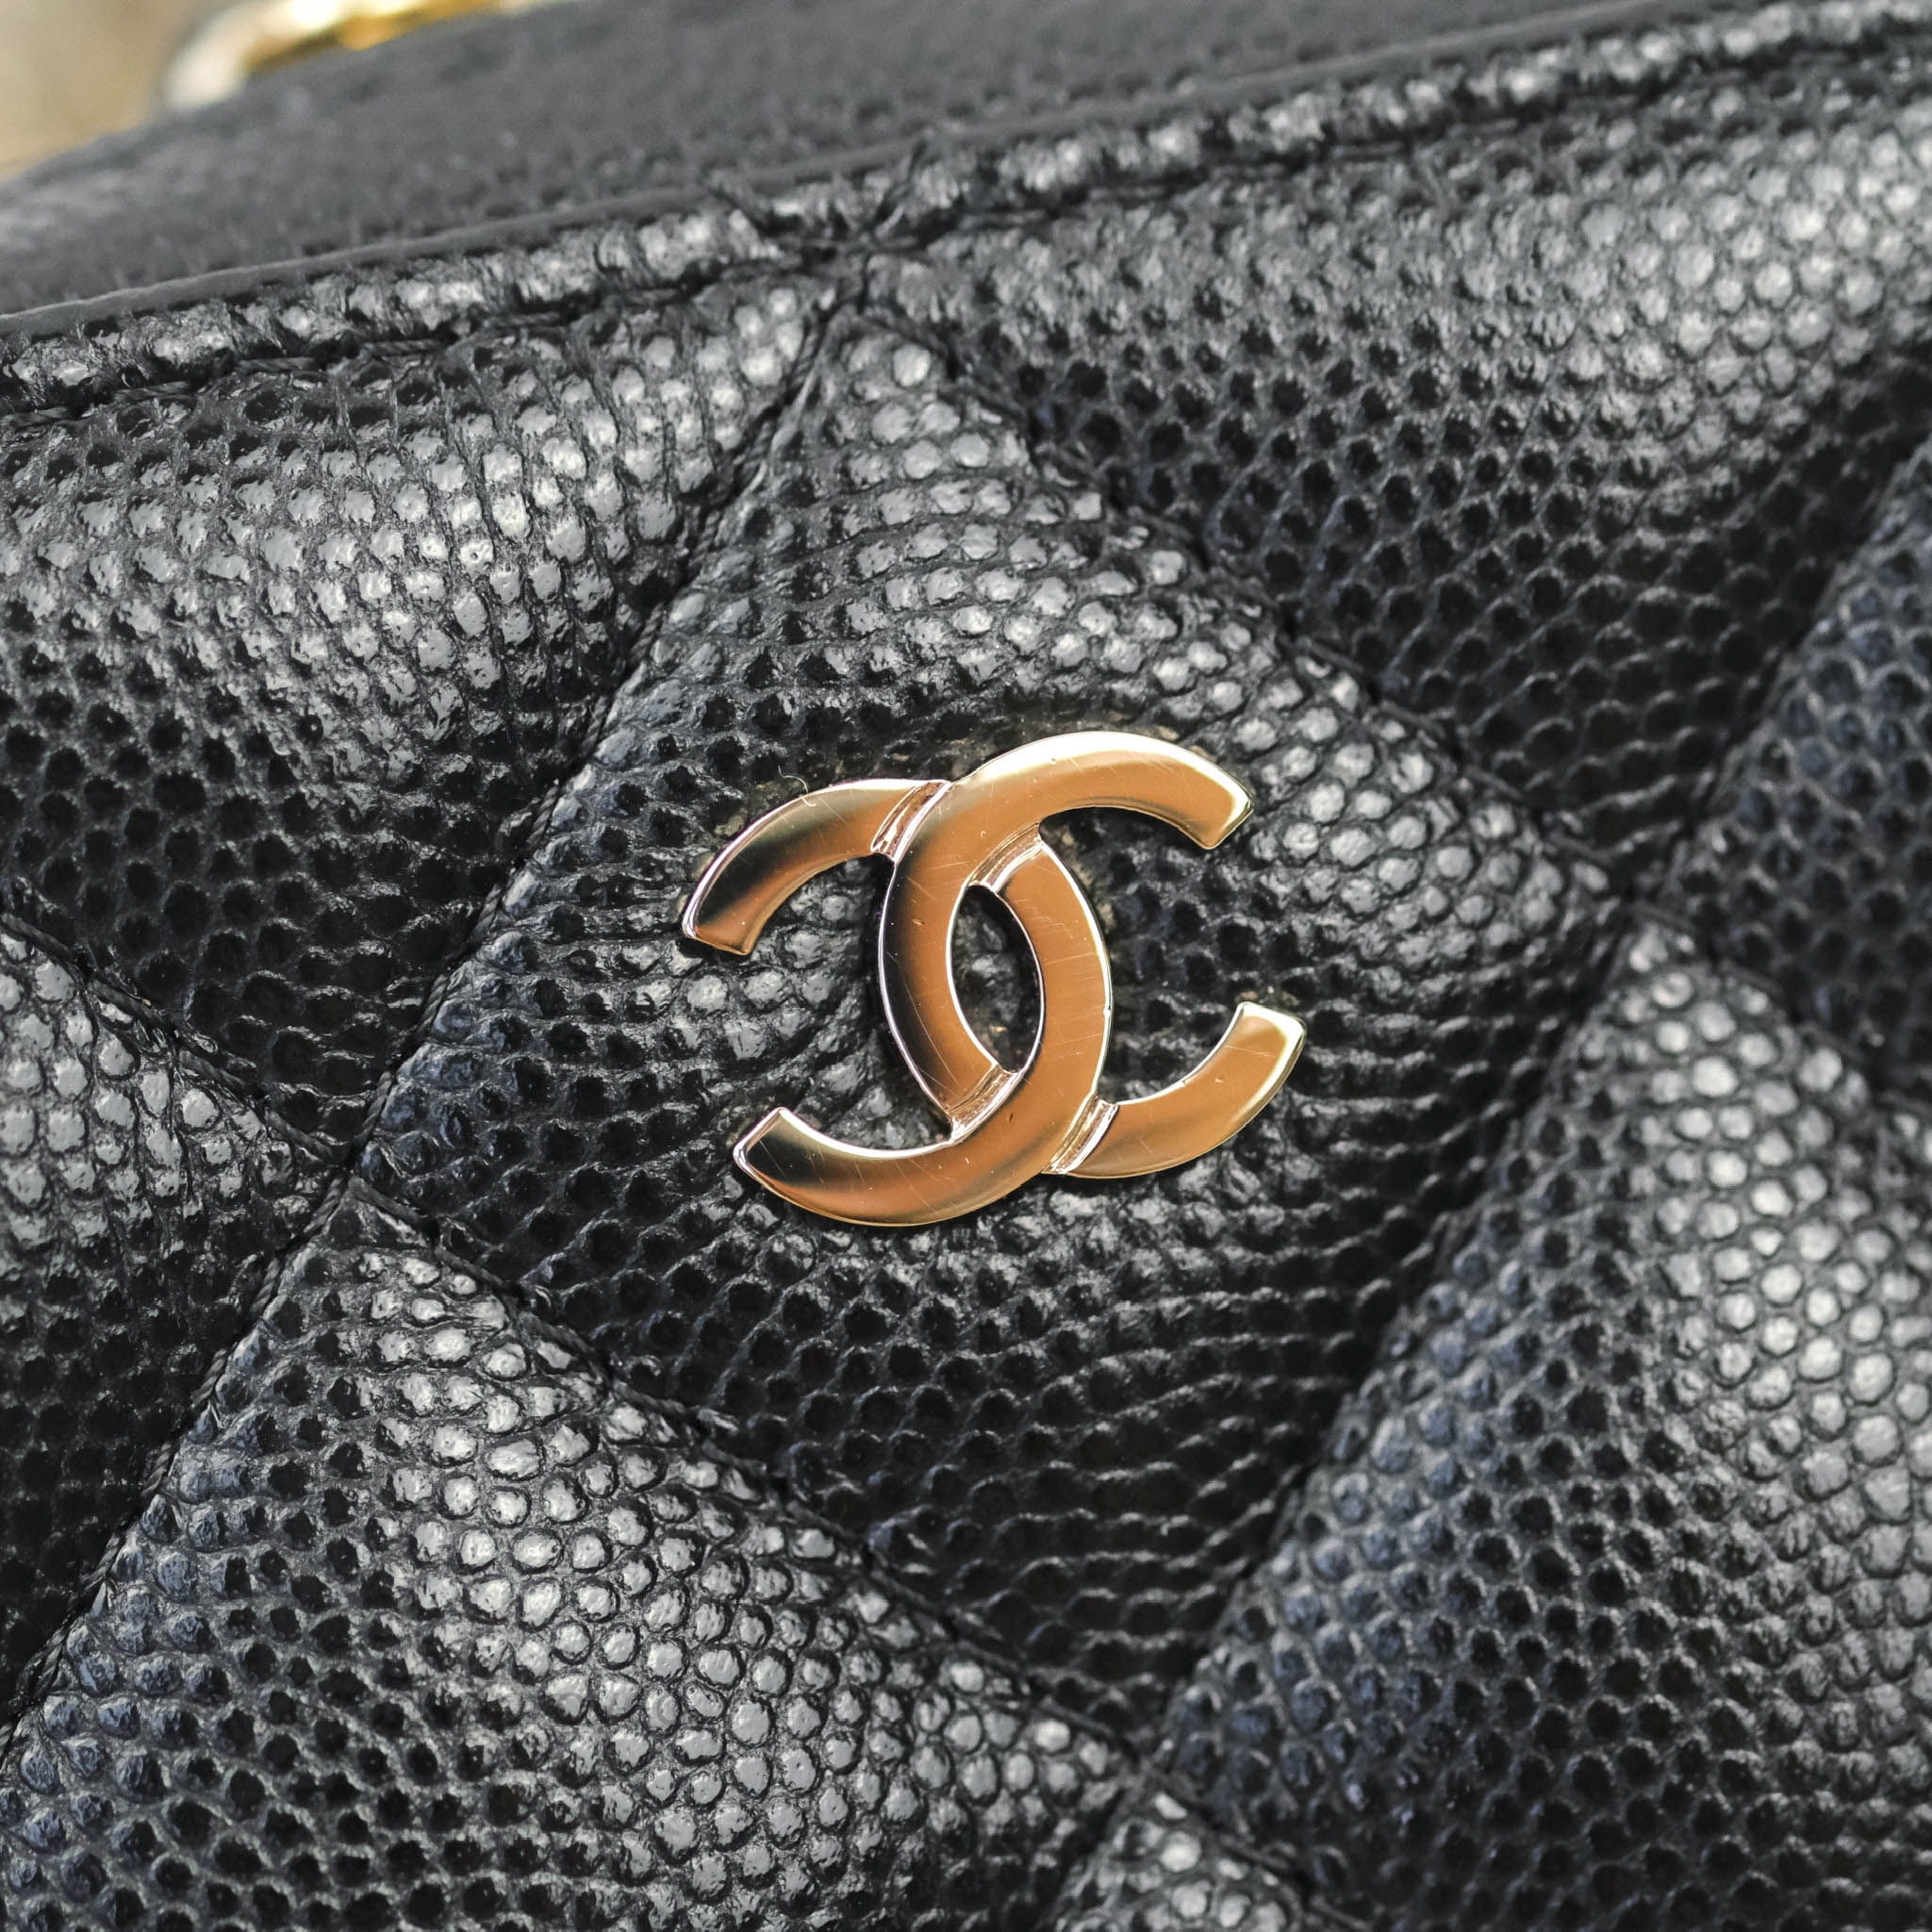 Chanel Quilted Classic WOC Black Caviar Gold Hardware – Coco